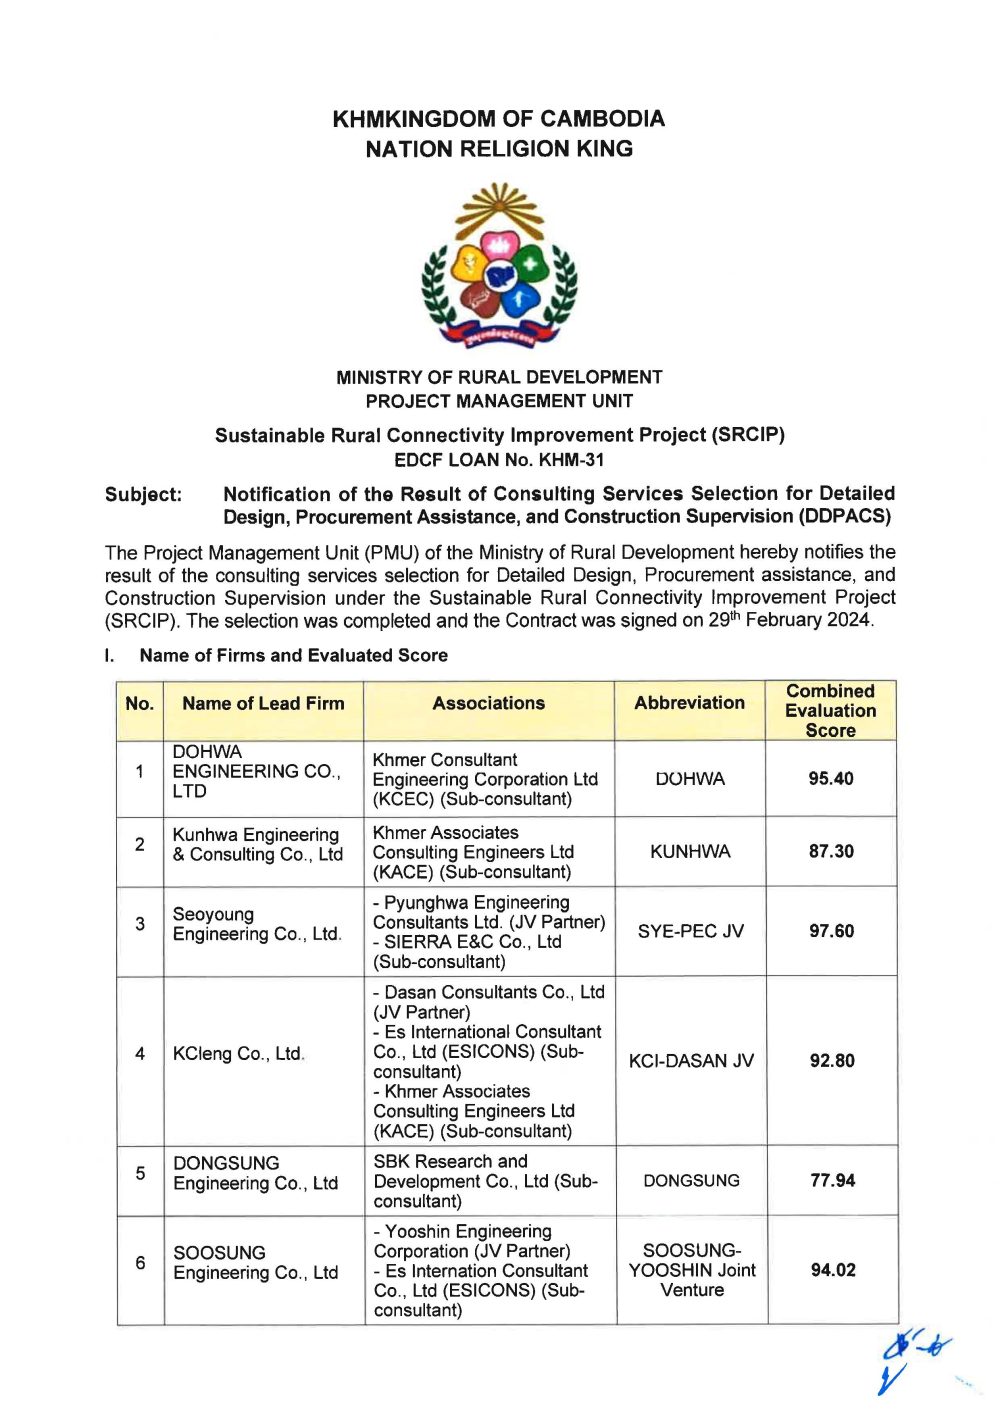 Notification of the Result of Consulting Services Selection for Page 1